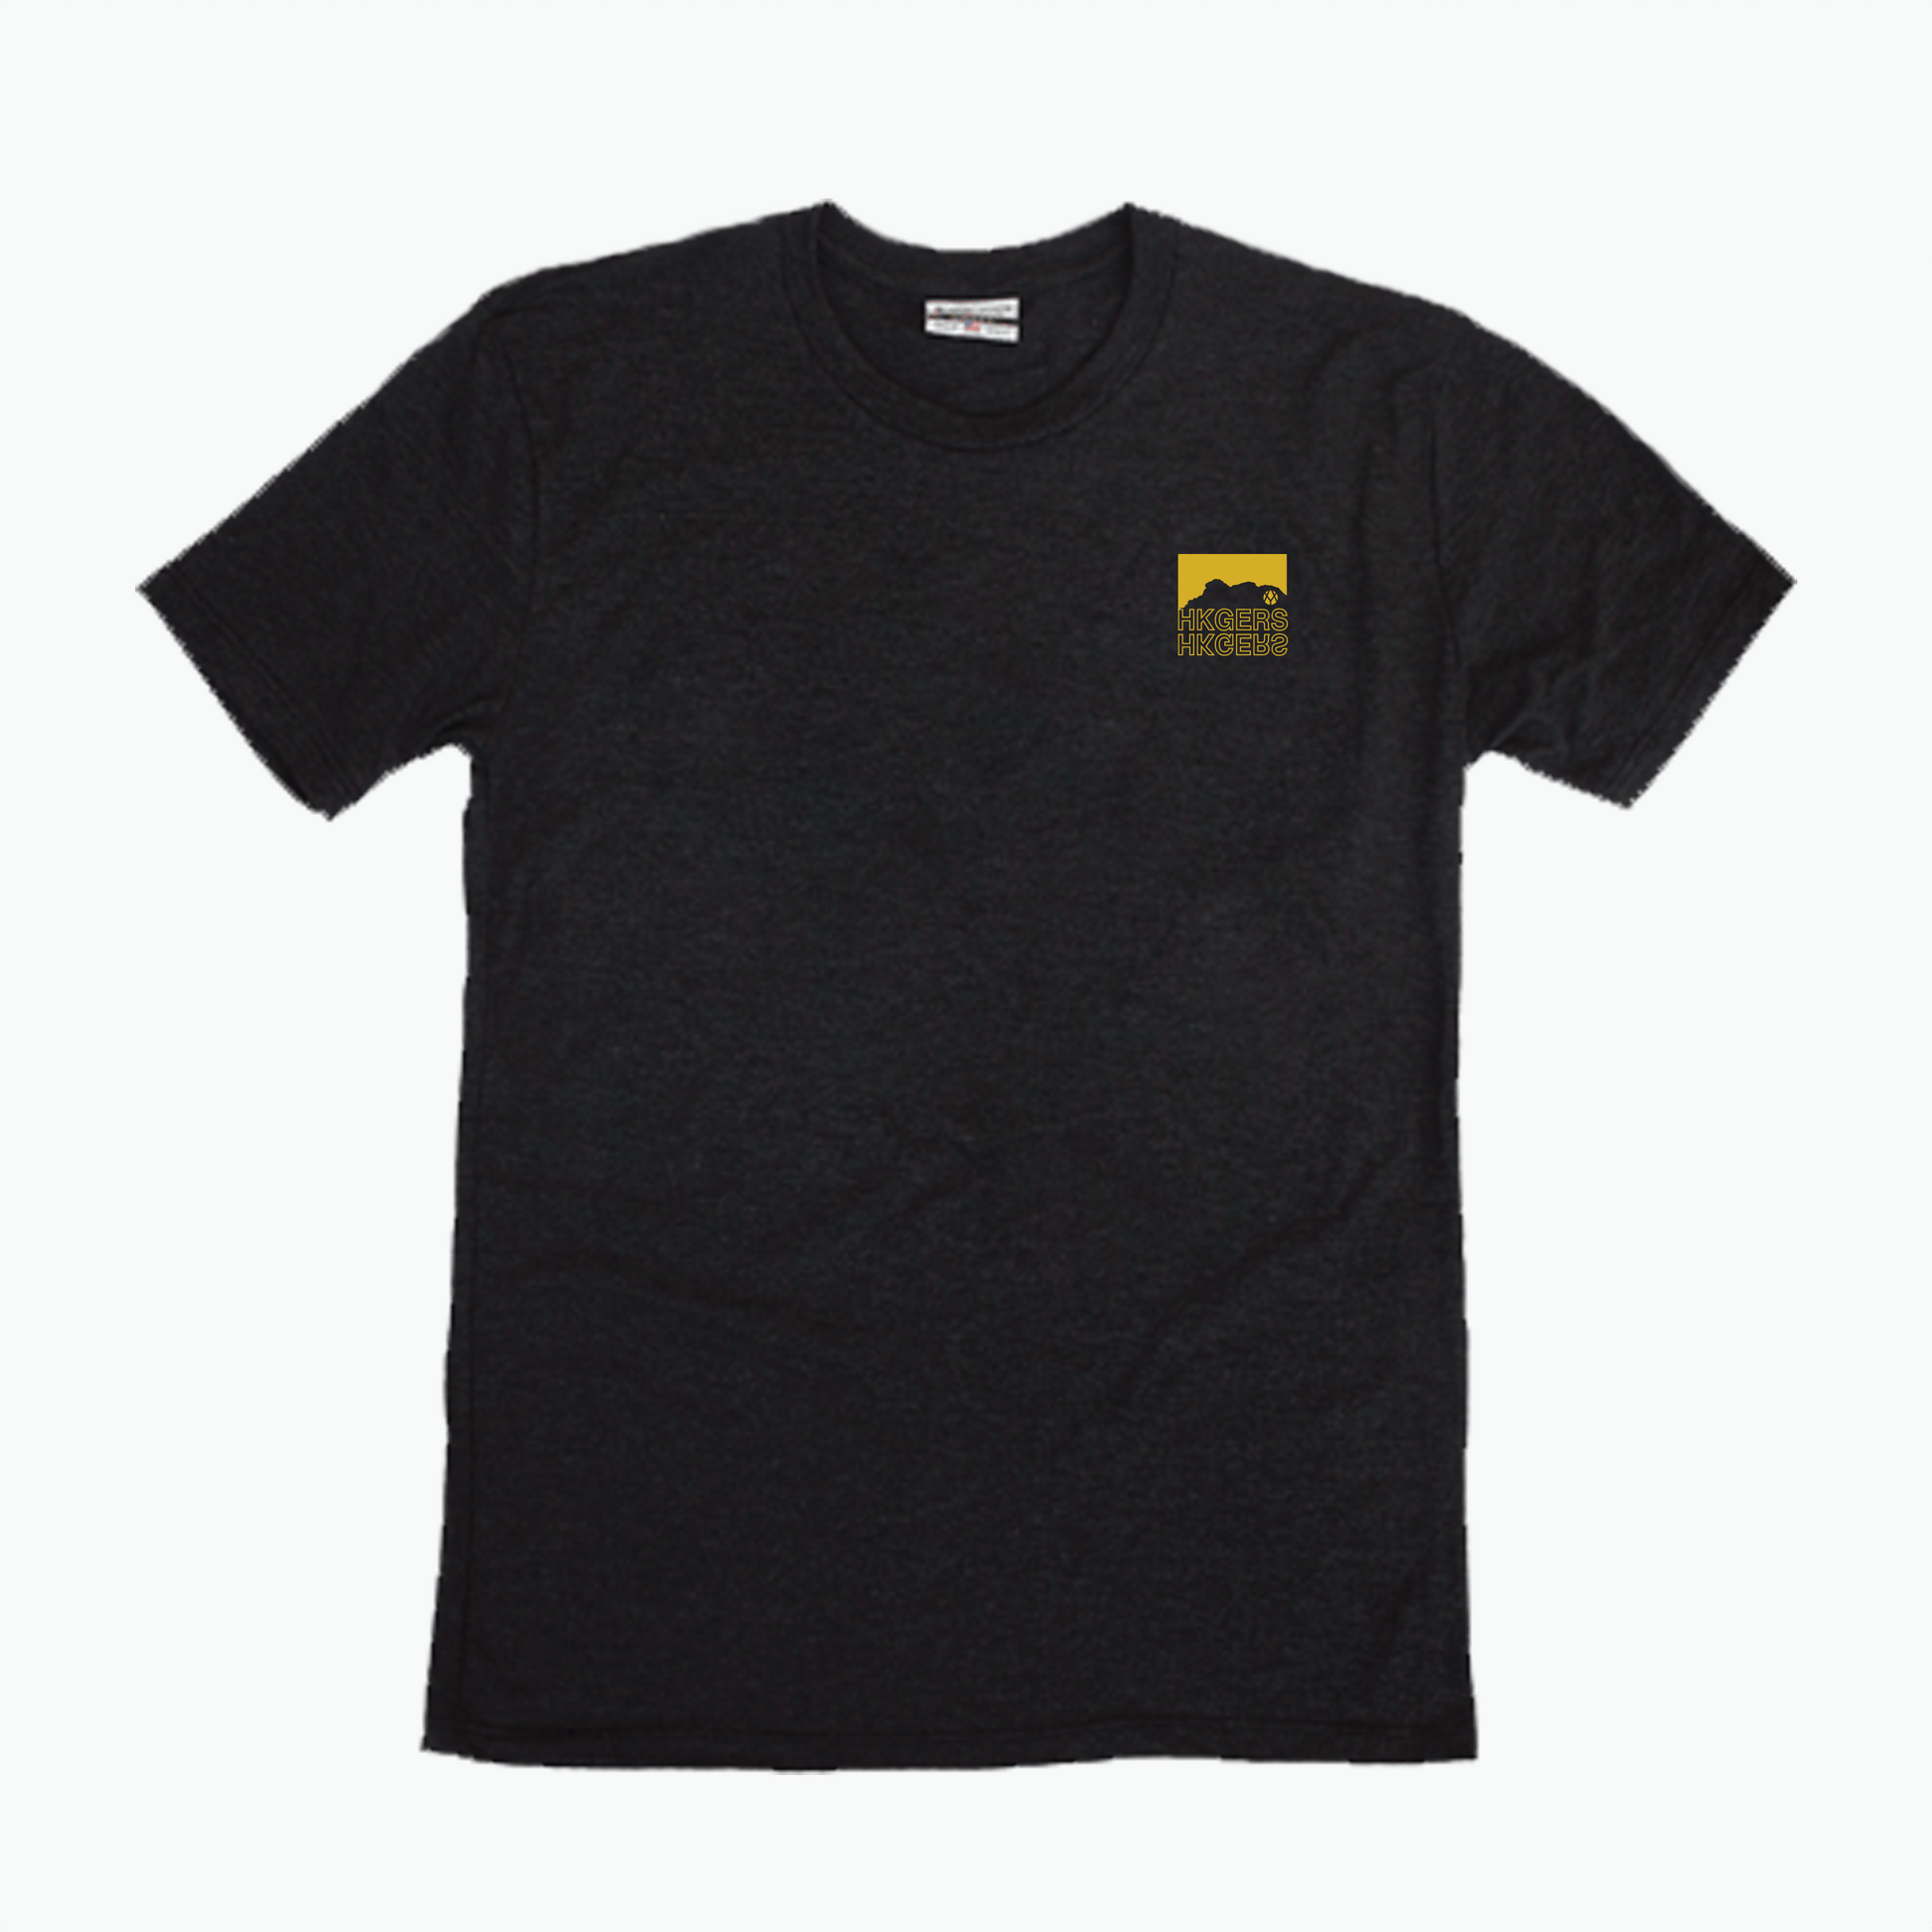 HKGERS T-Shirt (Black) - A Yellow Object